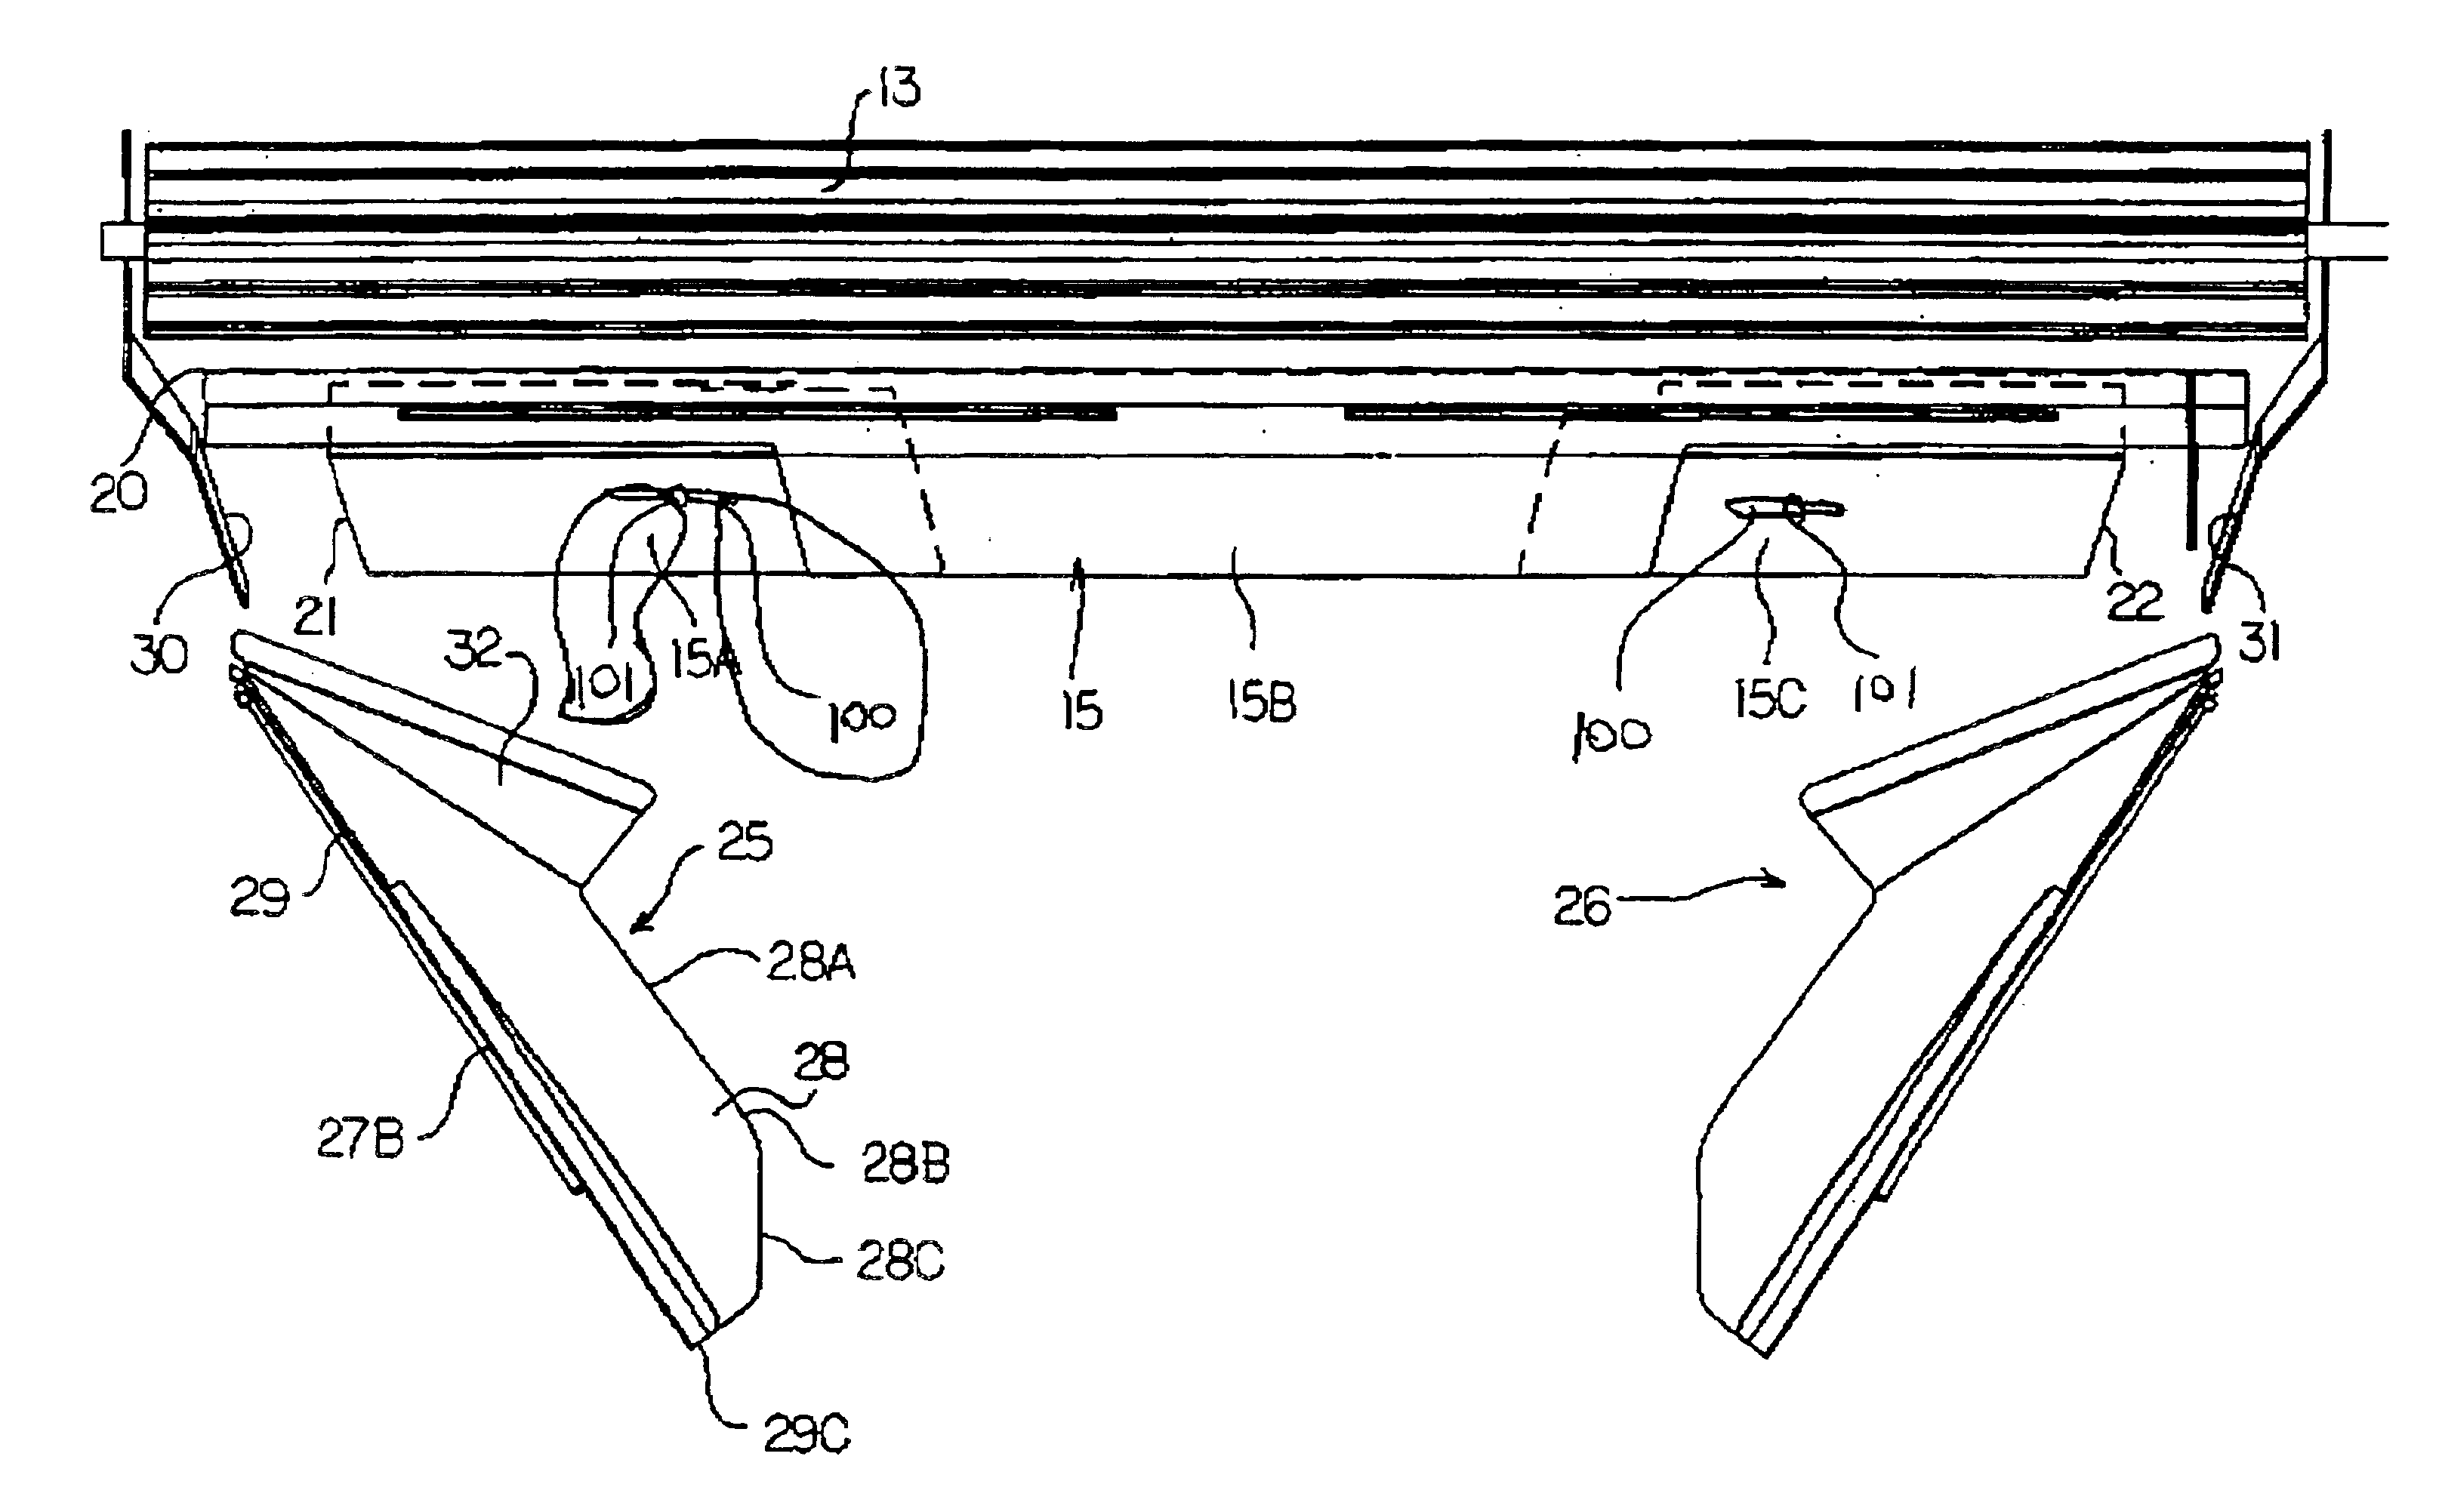 Windrow forming system for a crop harvesting header